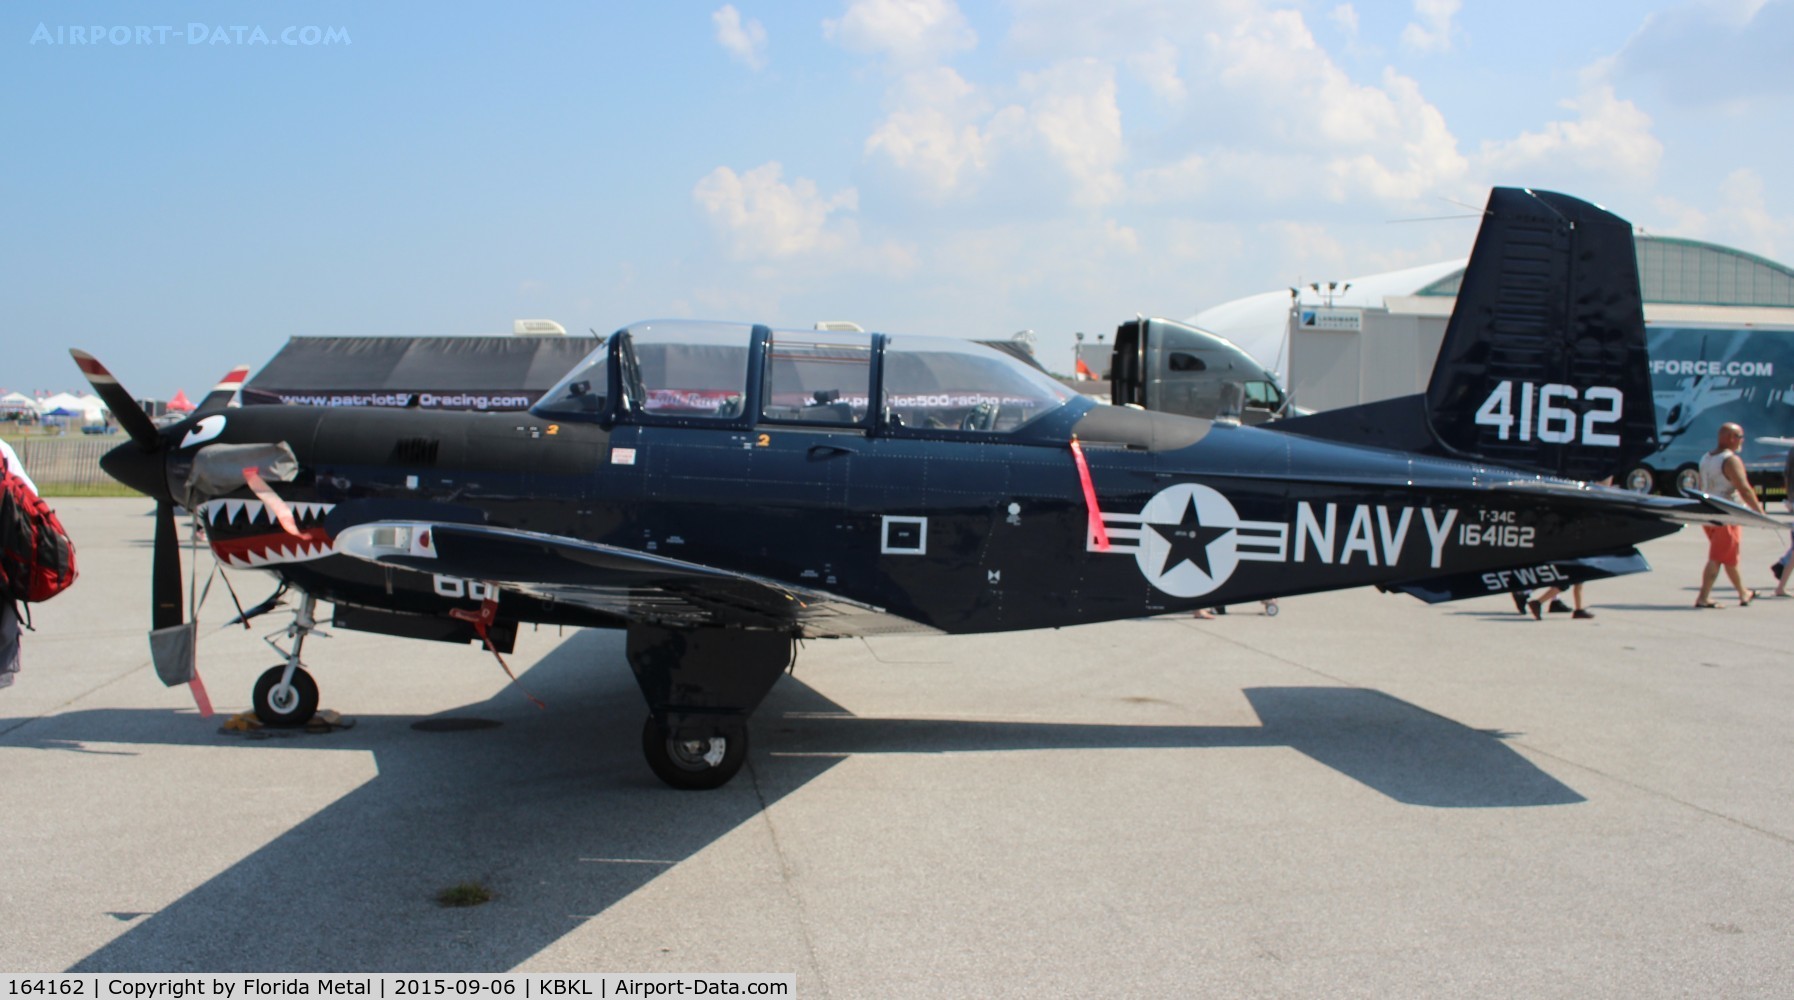 164162, Beech T-34C Turbo Mentor C/N GL-342, Cleveland Airshow 2015